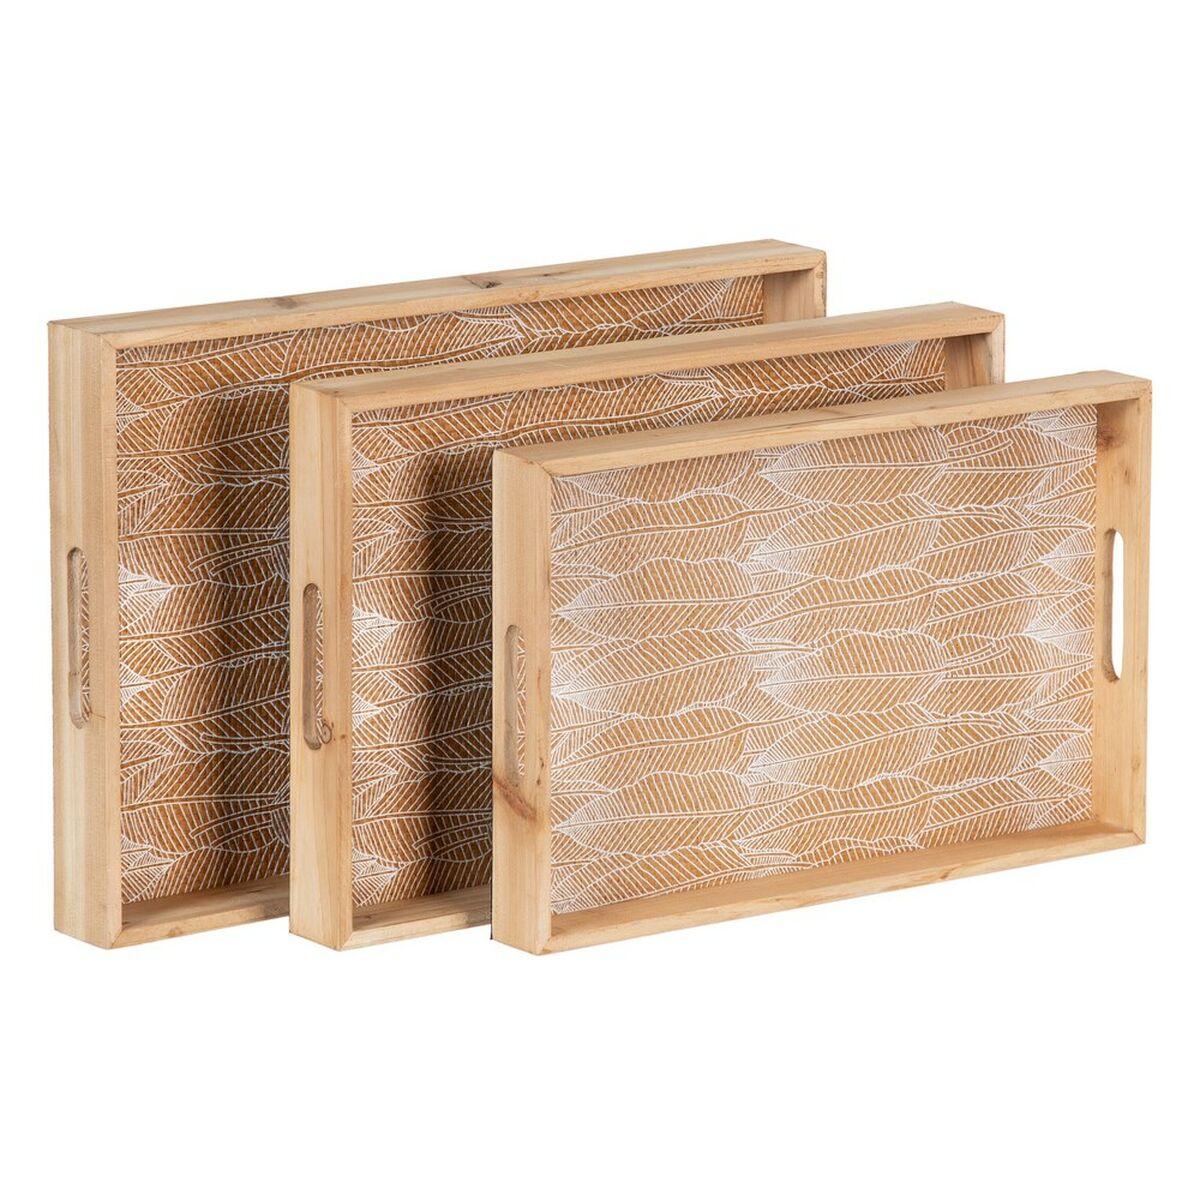 Snack tray 45 x 31 x 5 cm Sheets Natural Wood Rattan 3 Pieces